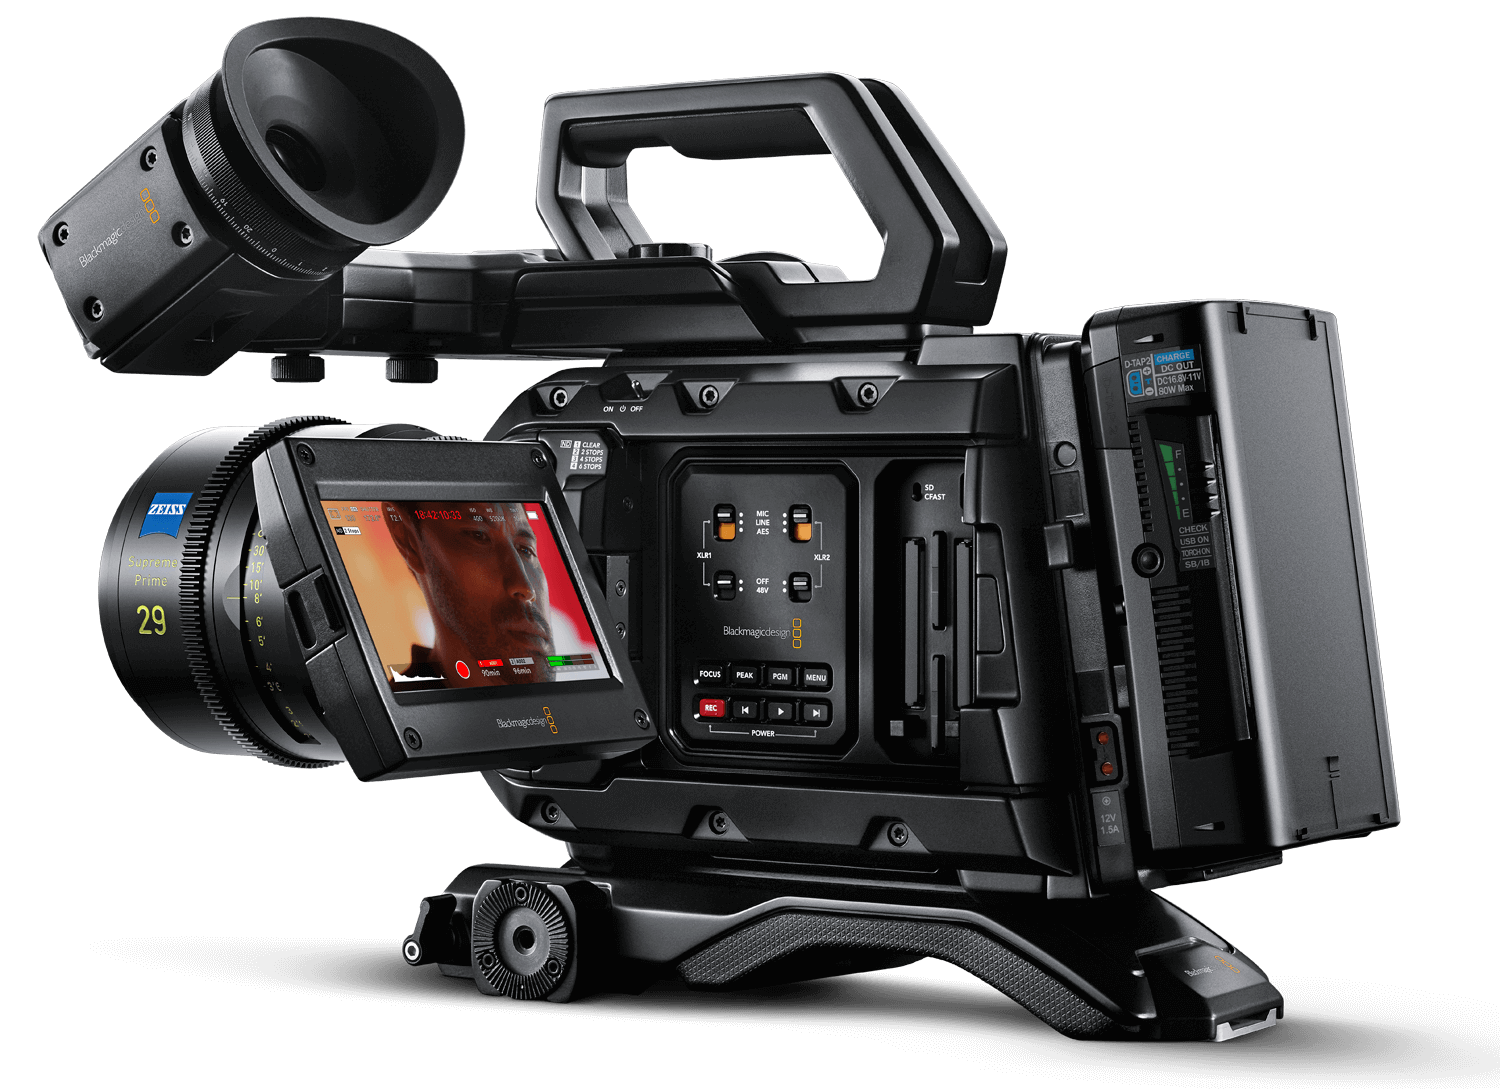 Blackmagic's new digital film camera can record 12K footage at up to 60 frames per second